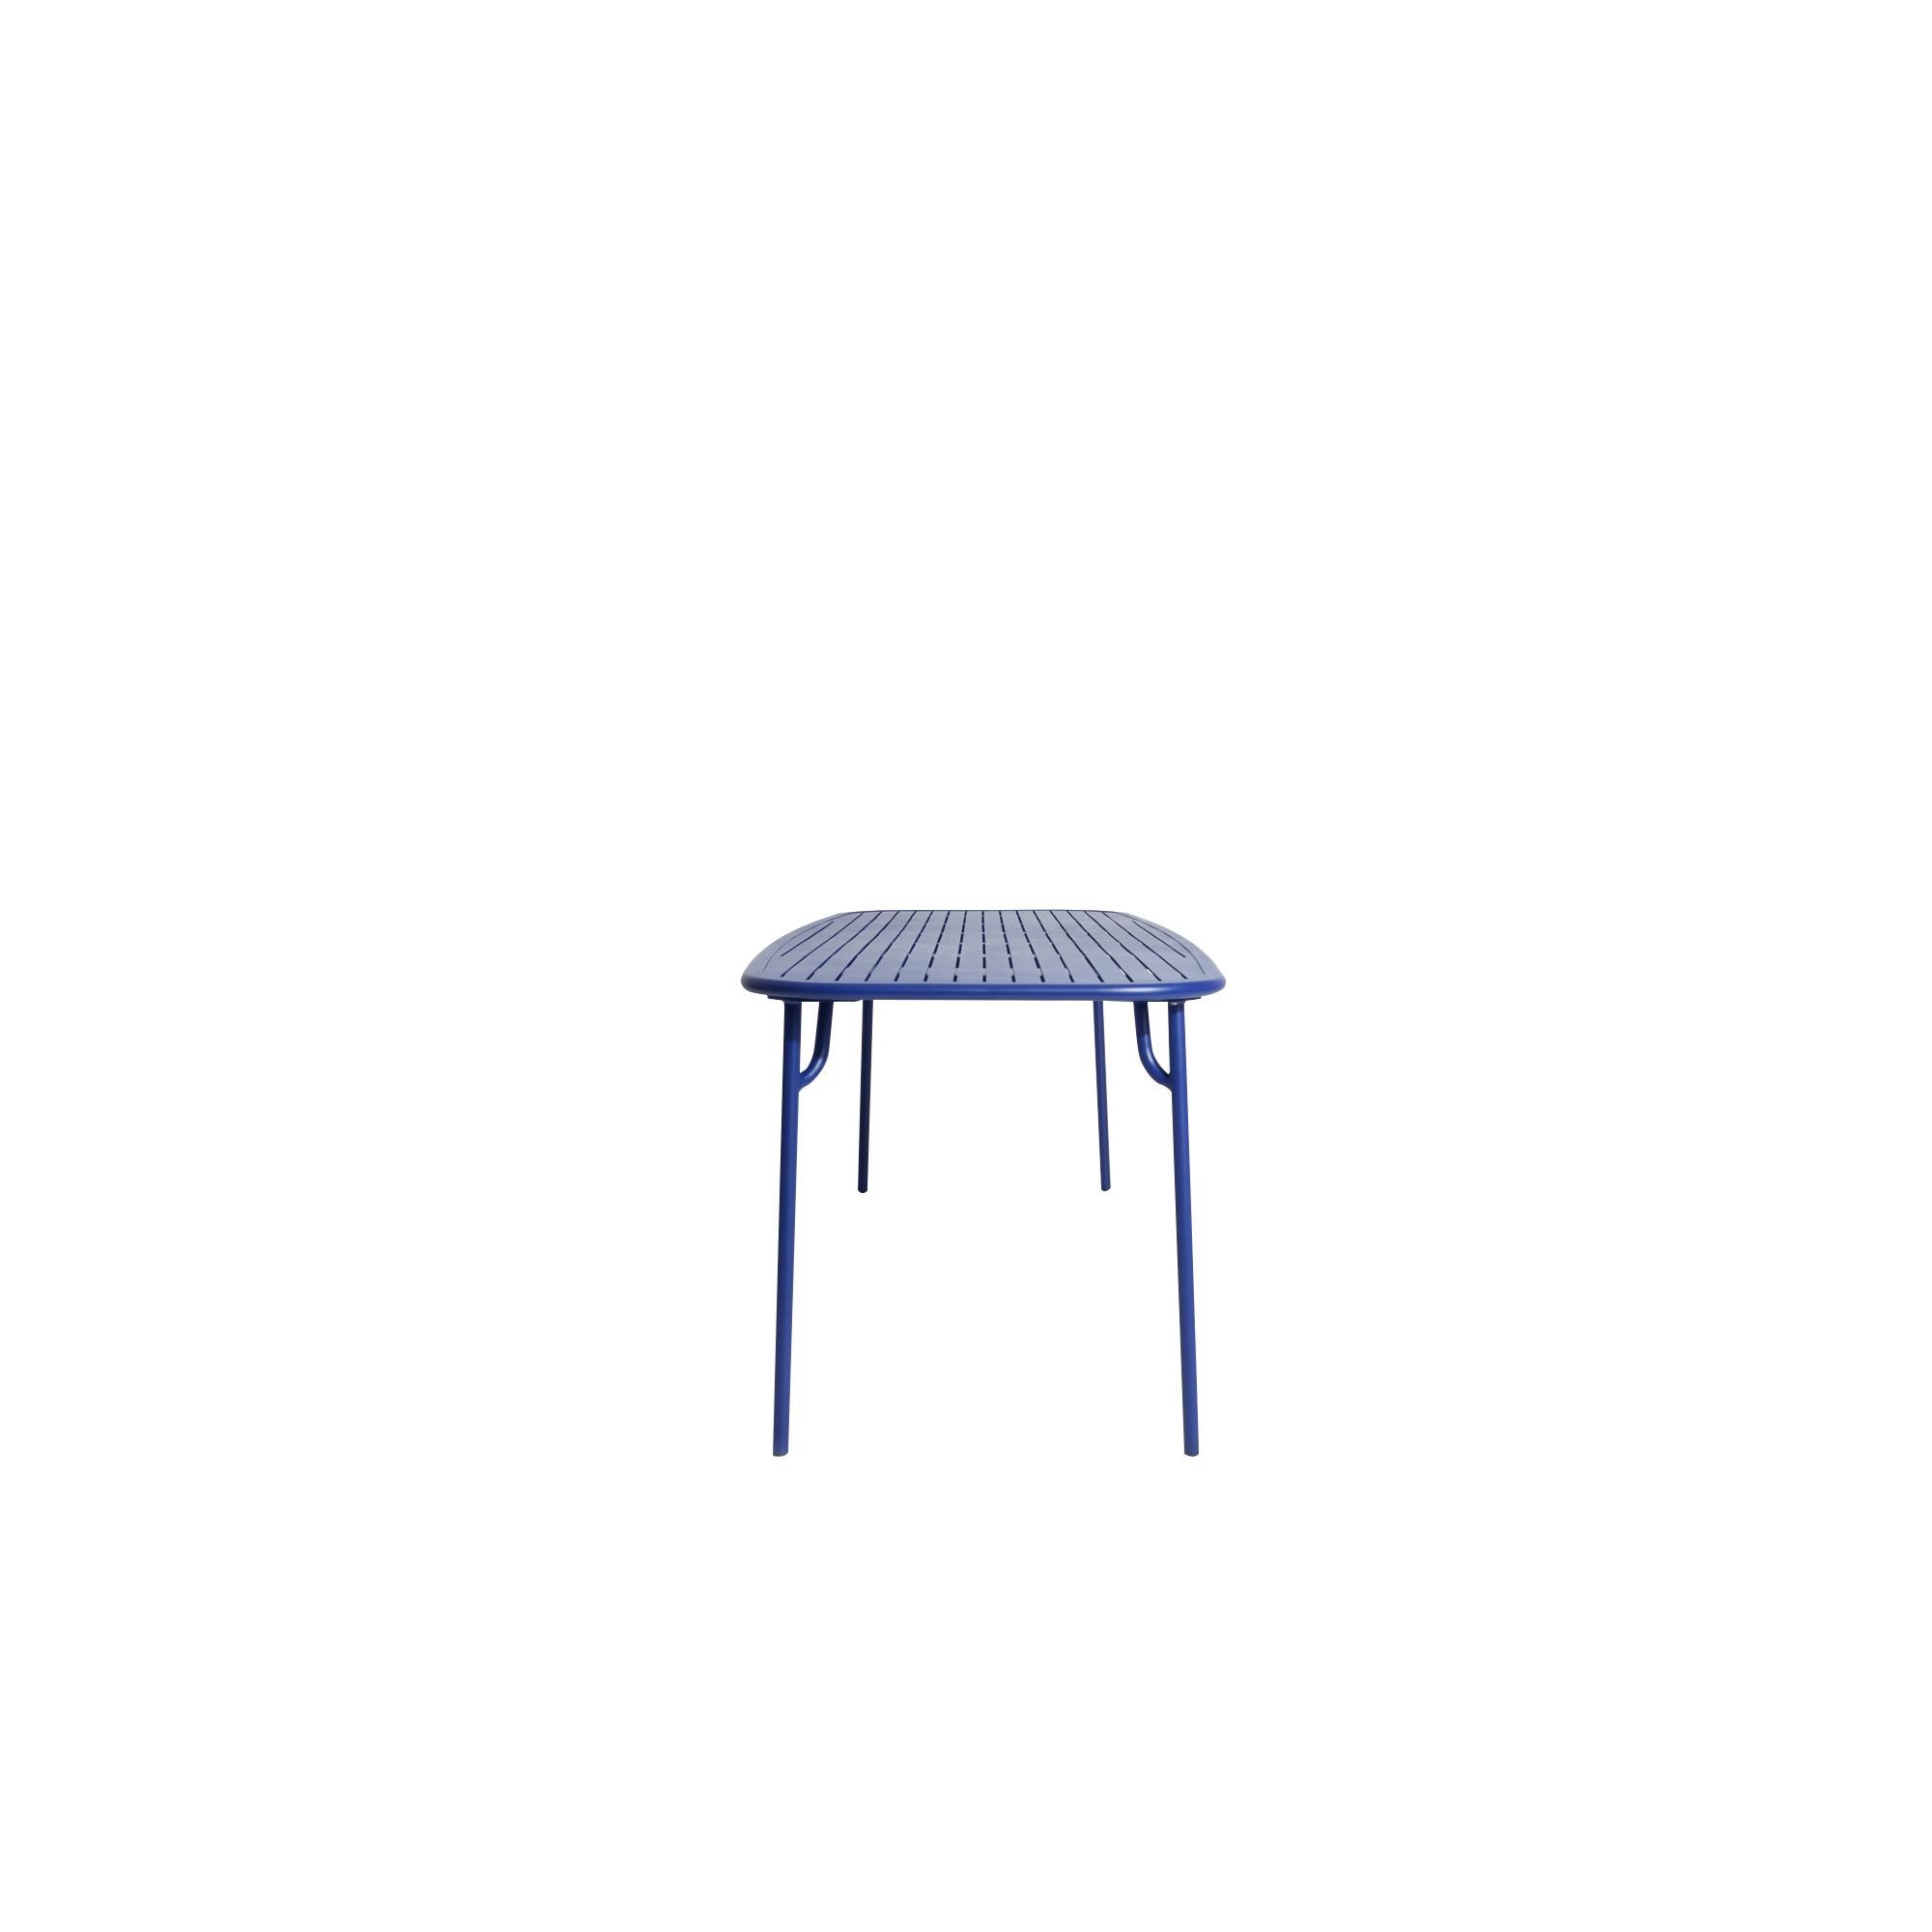 Chinese Petite Friture Week-End Large Rectangular Dining Table in Blue with Slats For Sale